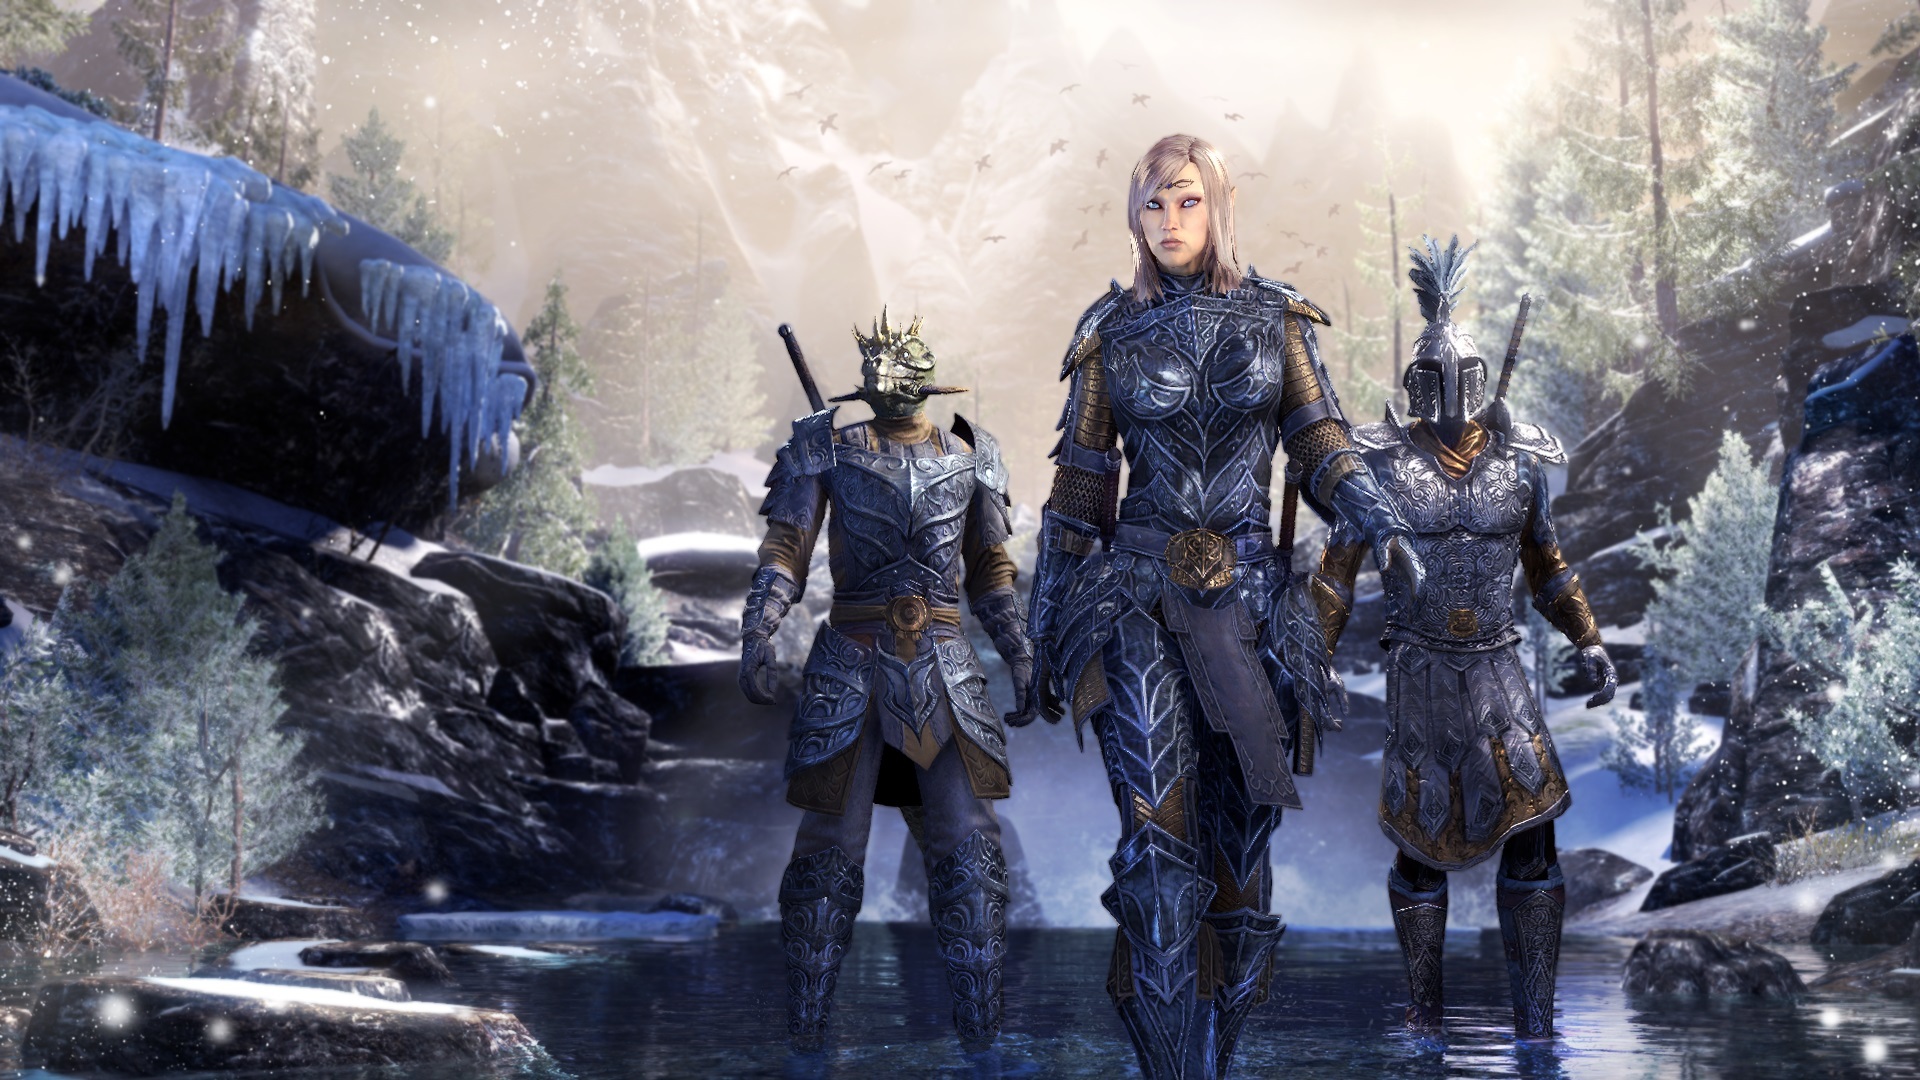 Orsinium is Now Available on PC & Mac! - The Elder Scrolls Online